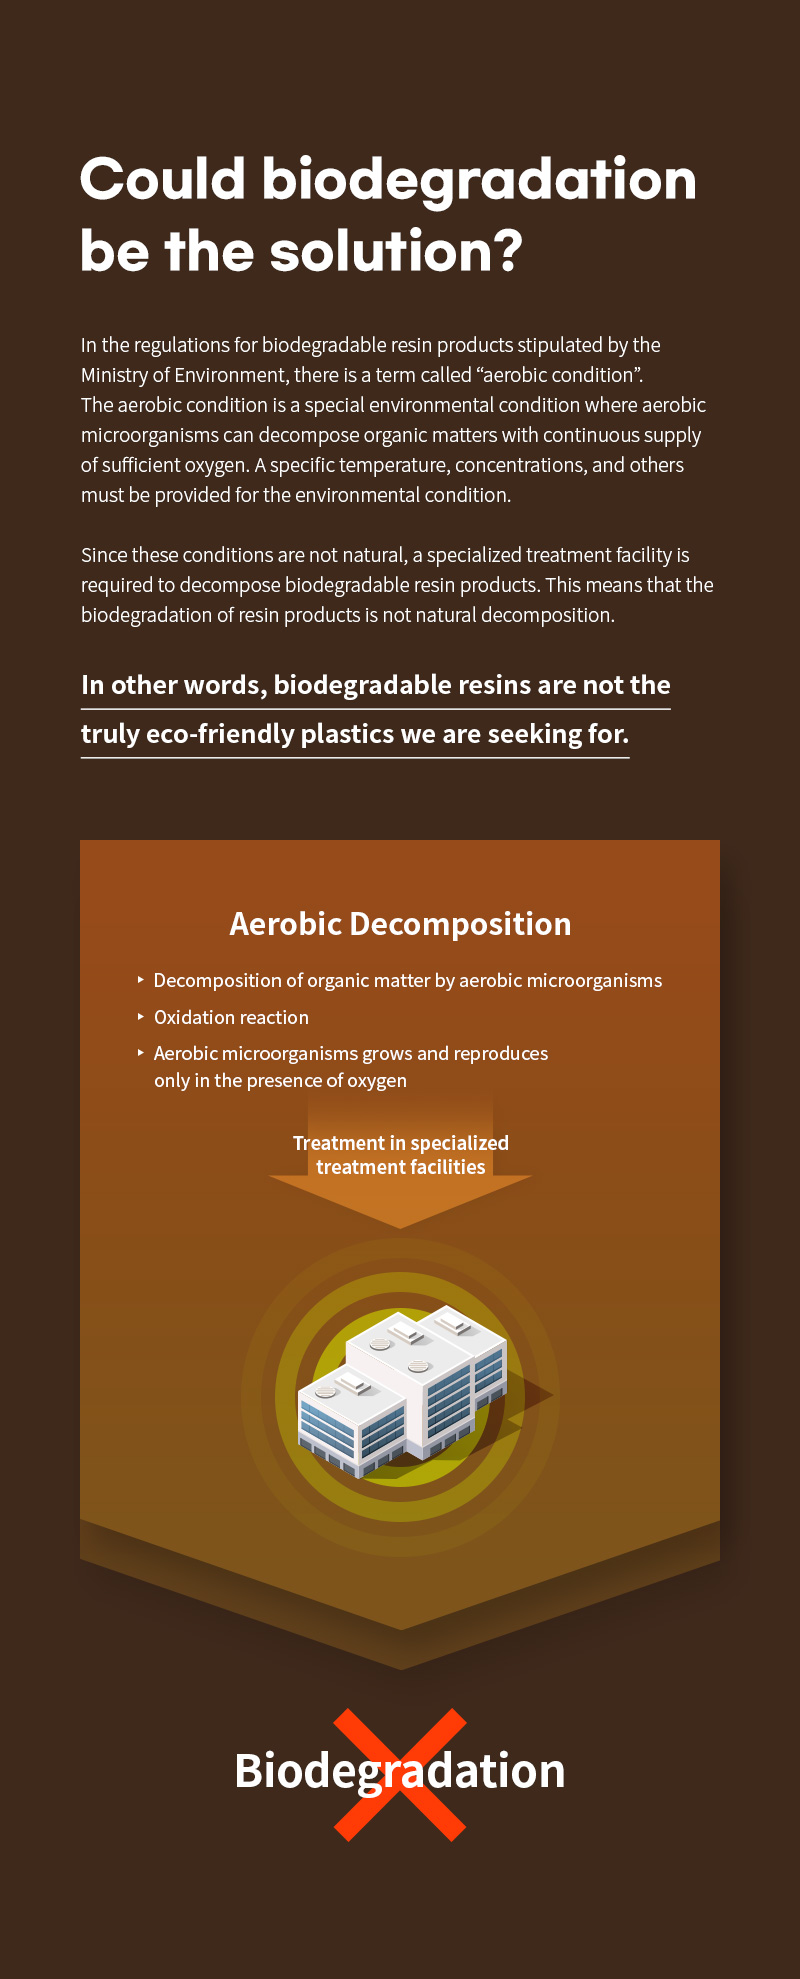 Aerobic Decomposition 1.Decomposition of organic matter by aerobic microorganisms 2.Oxidation reaction 3.Aerobic microorganisms grows and reproduces only in the presence of oxygen > Treatment in specialized treatment facilities > Biodegradation X